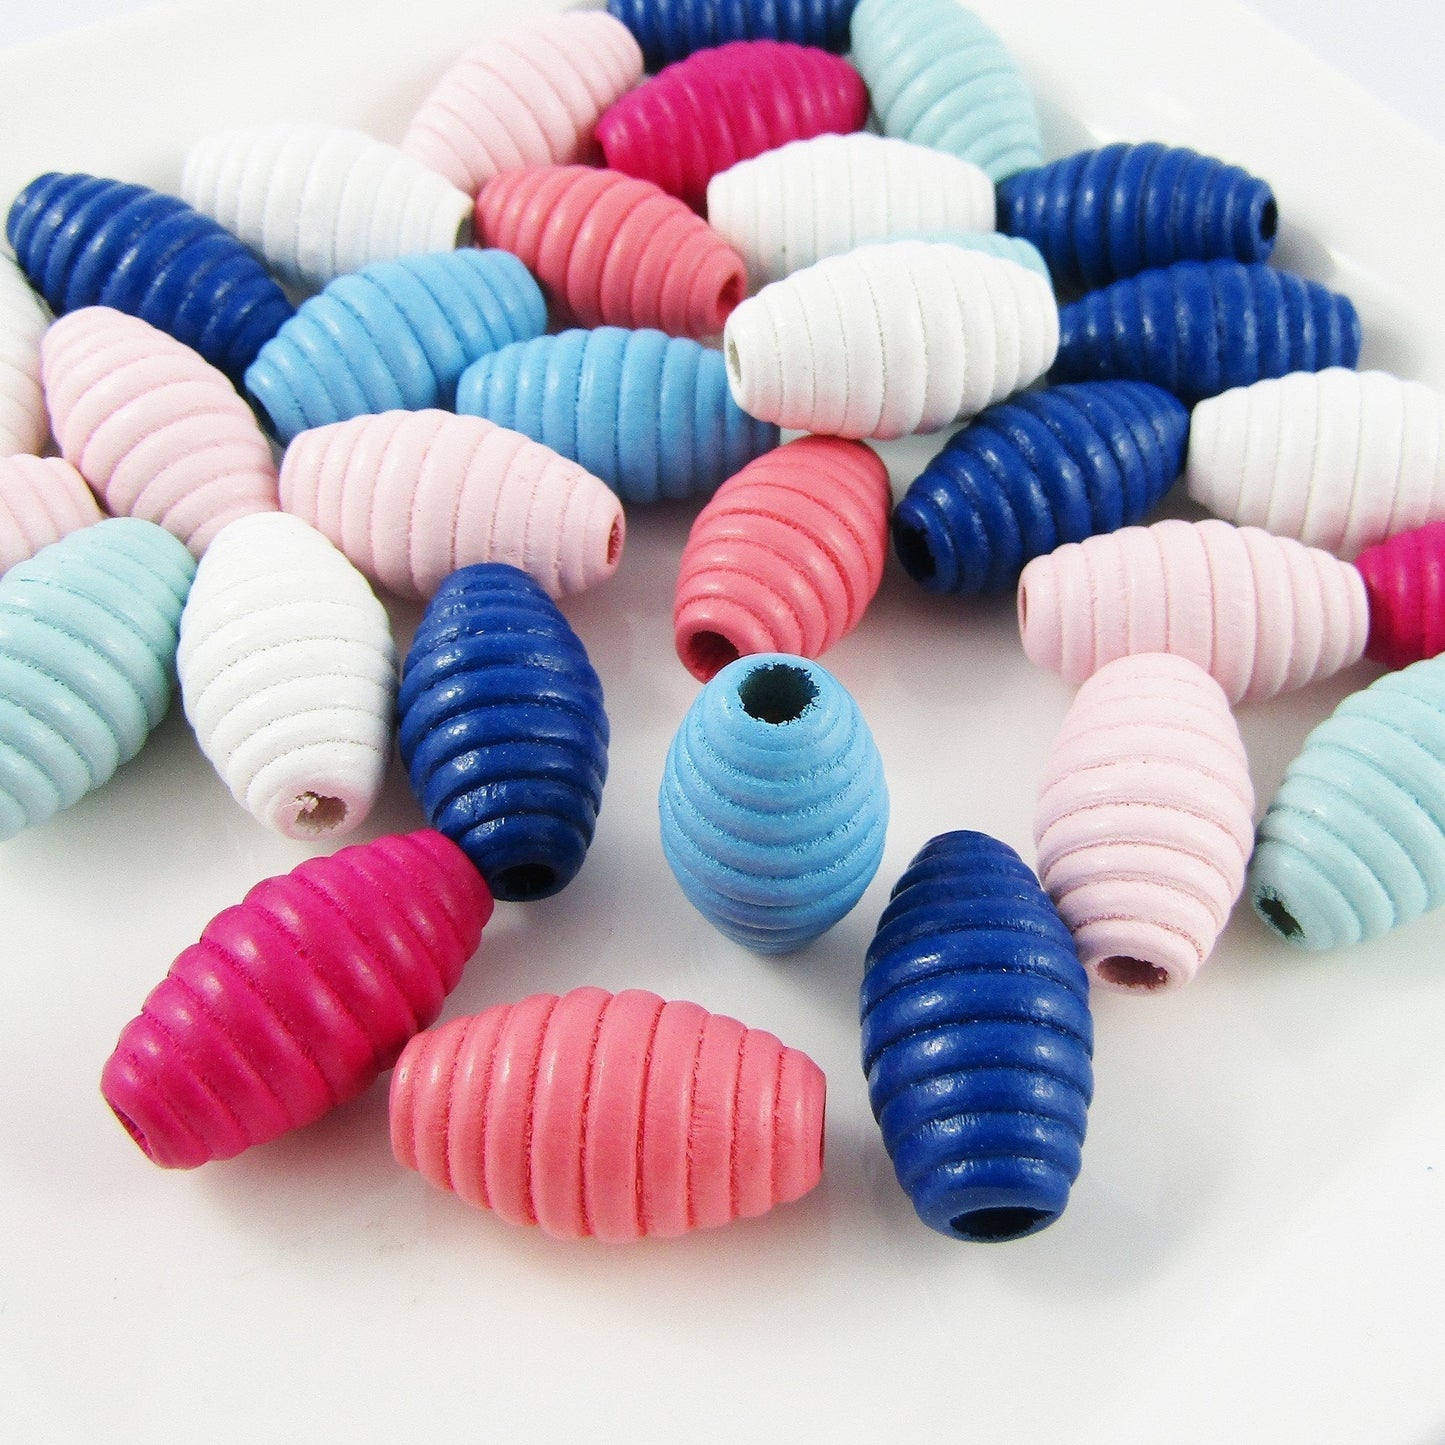 50g 35+pcs Wood Beehive Oval Craft Beads Mixed Pink Blue White 24x13mm Hole 3mm